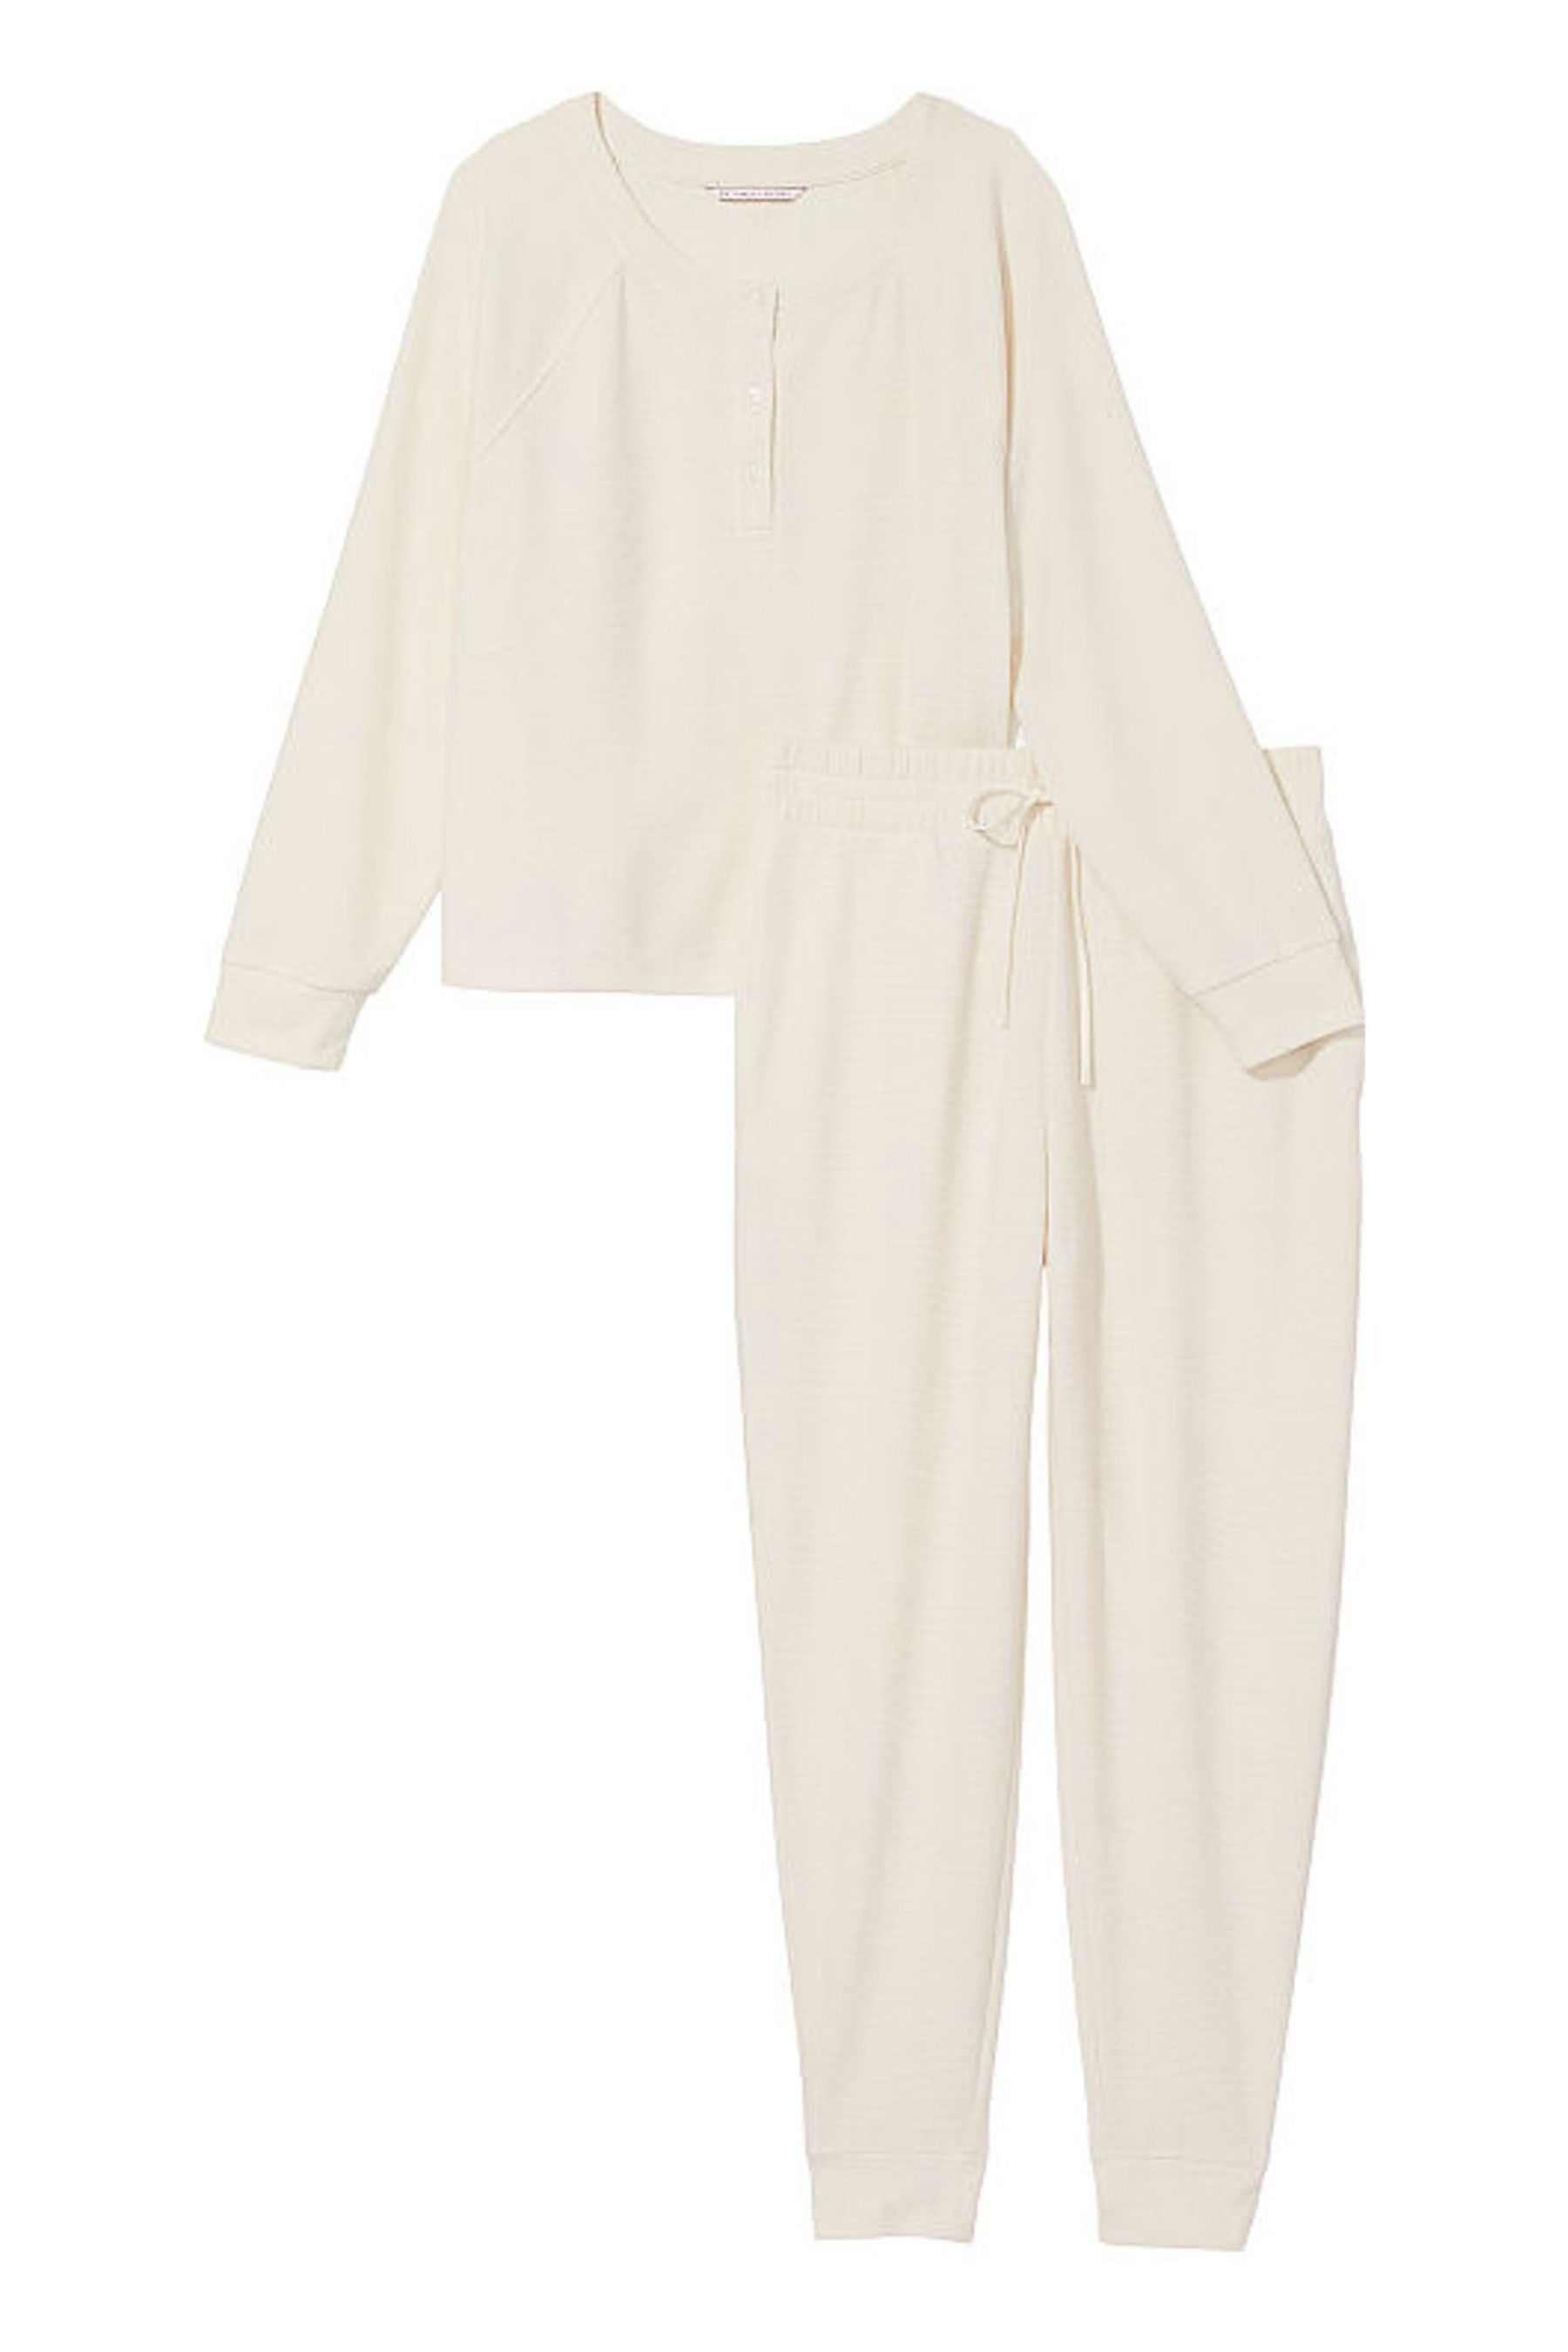 Buy Victoria's Secret Waffle Lounge Jogger Set from the Victoria's ...